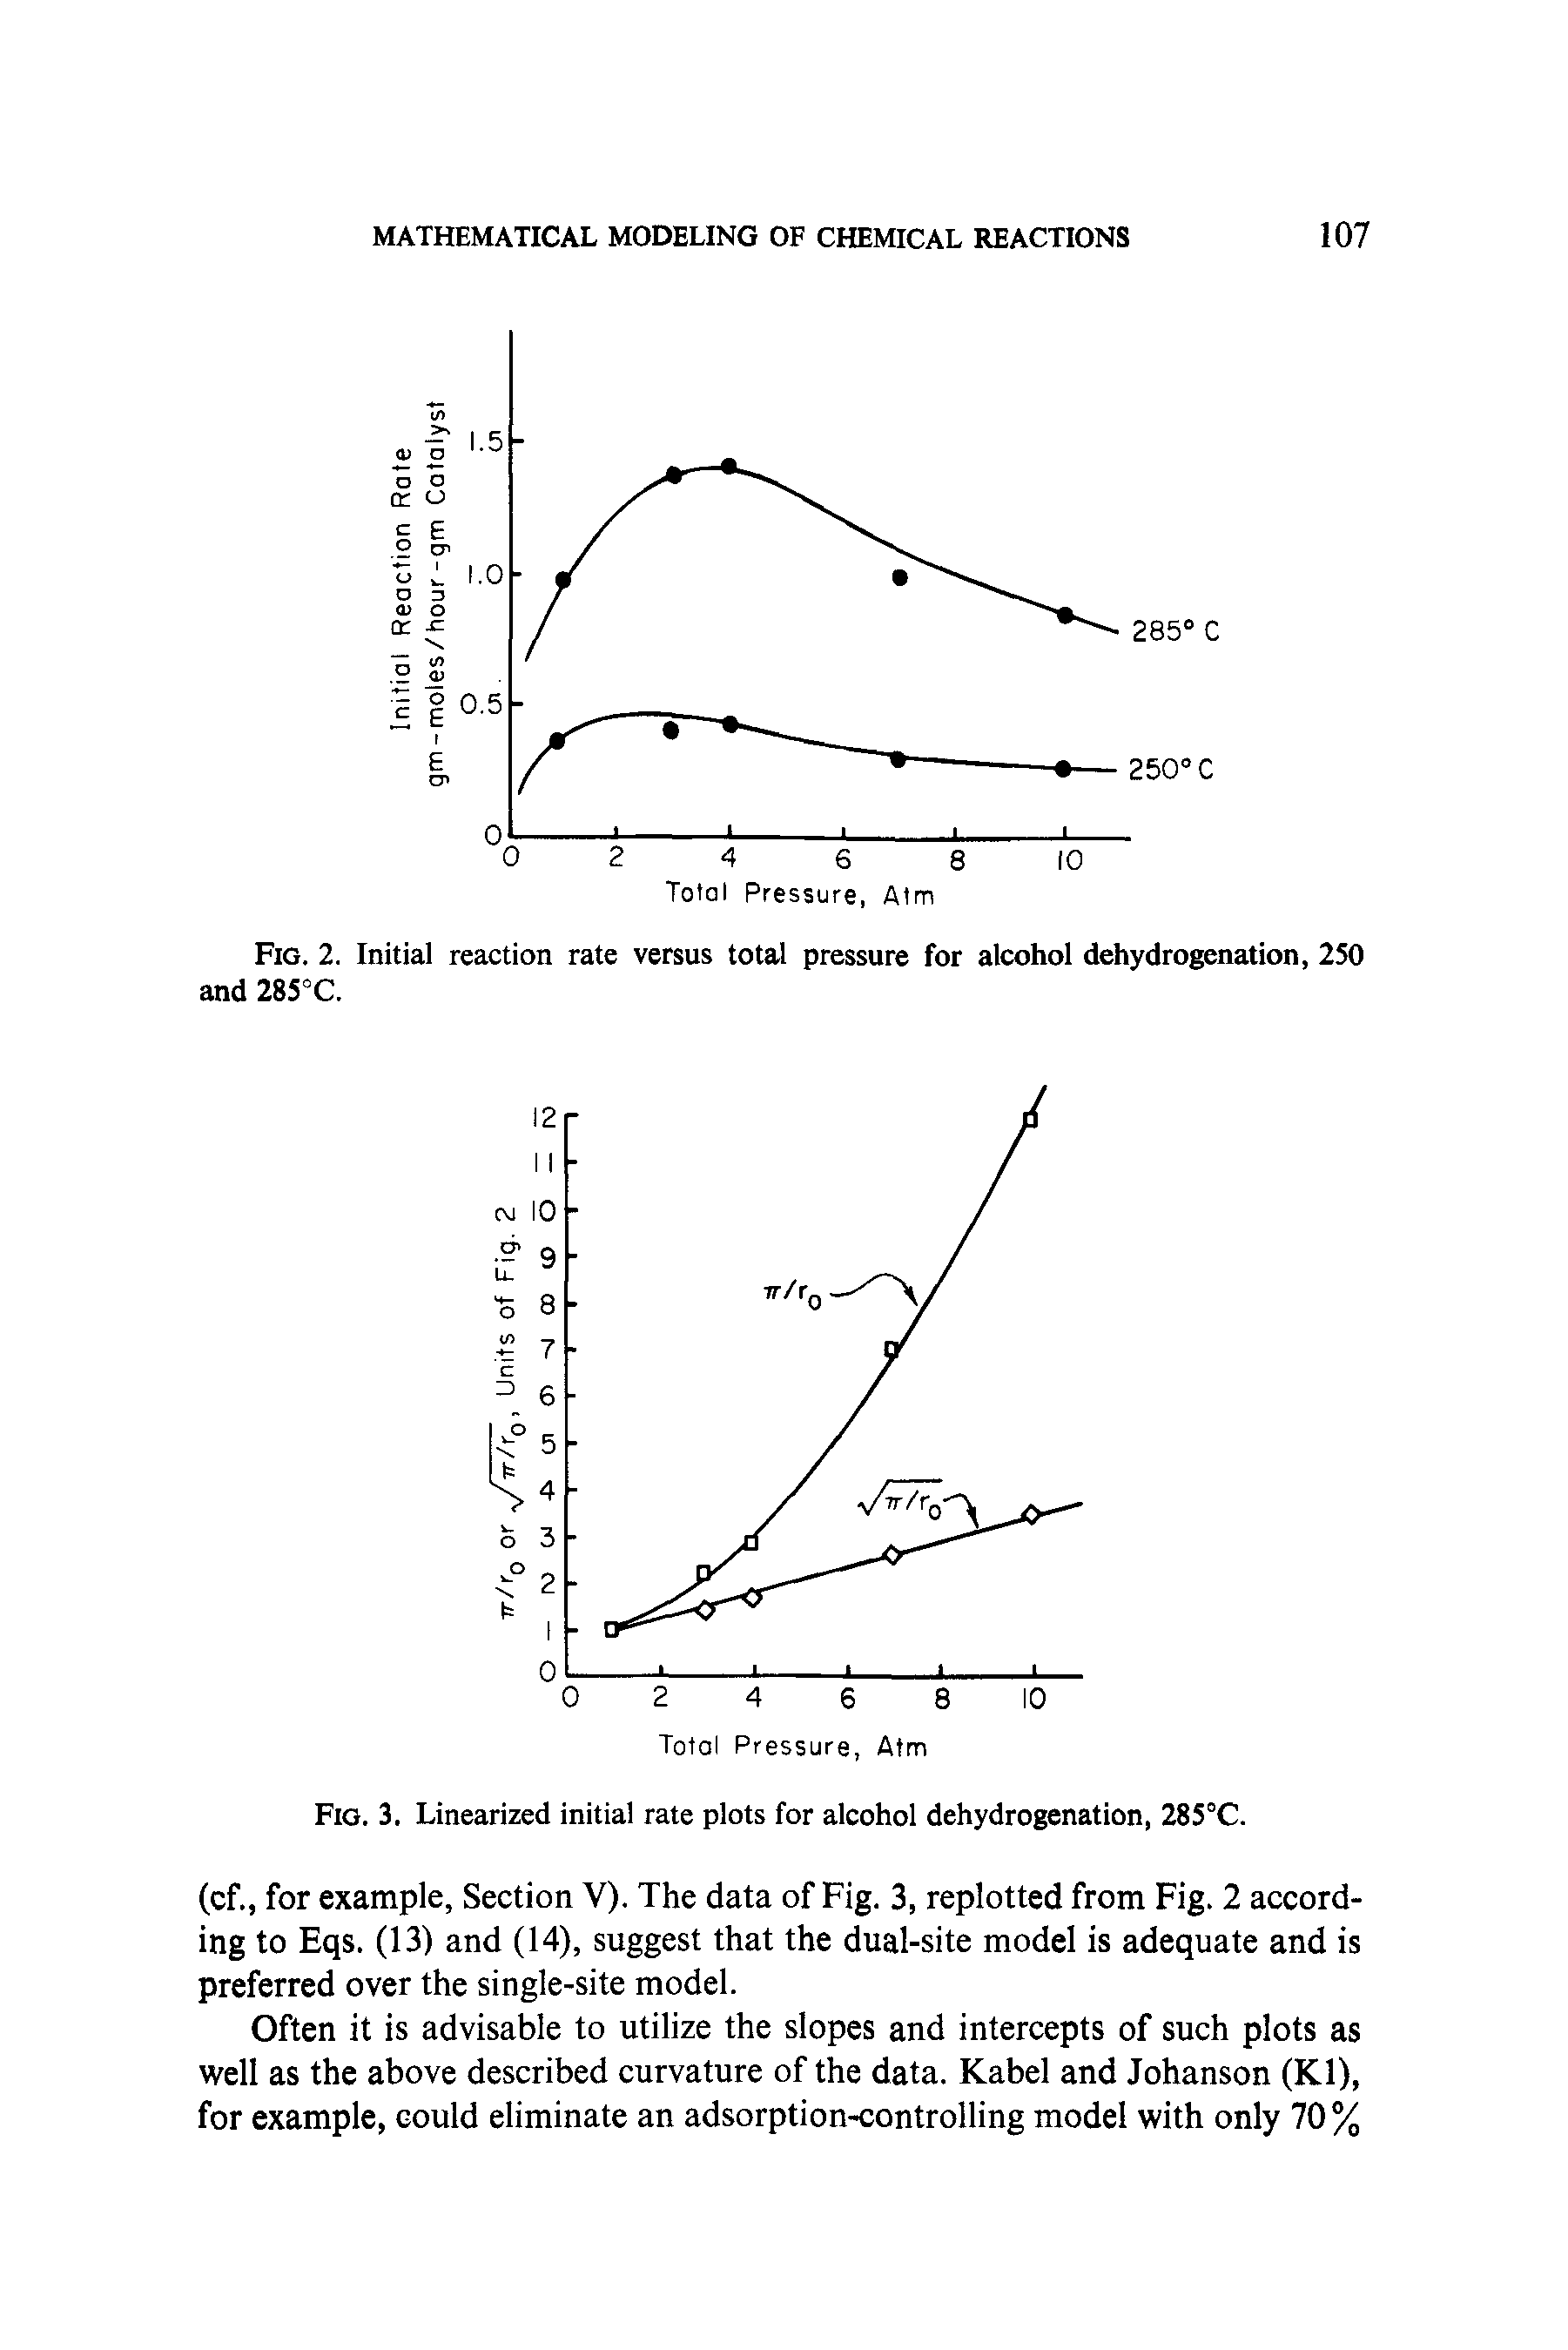 Fig. 3. Linearized initial rate plots for alcohol dehydrogenation, 285°C.